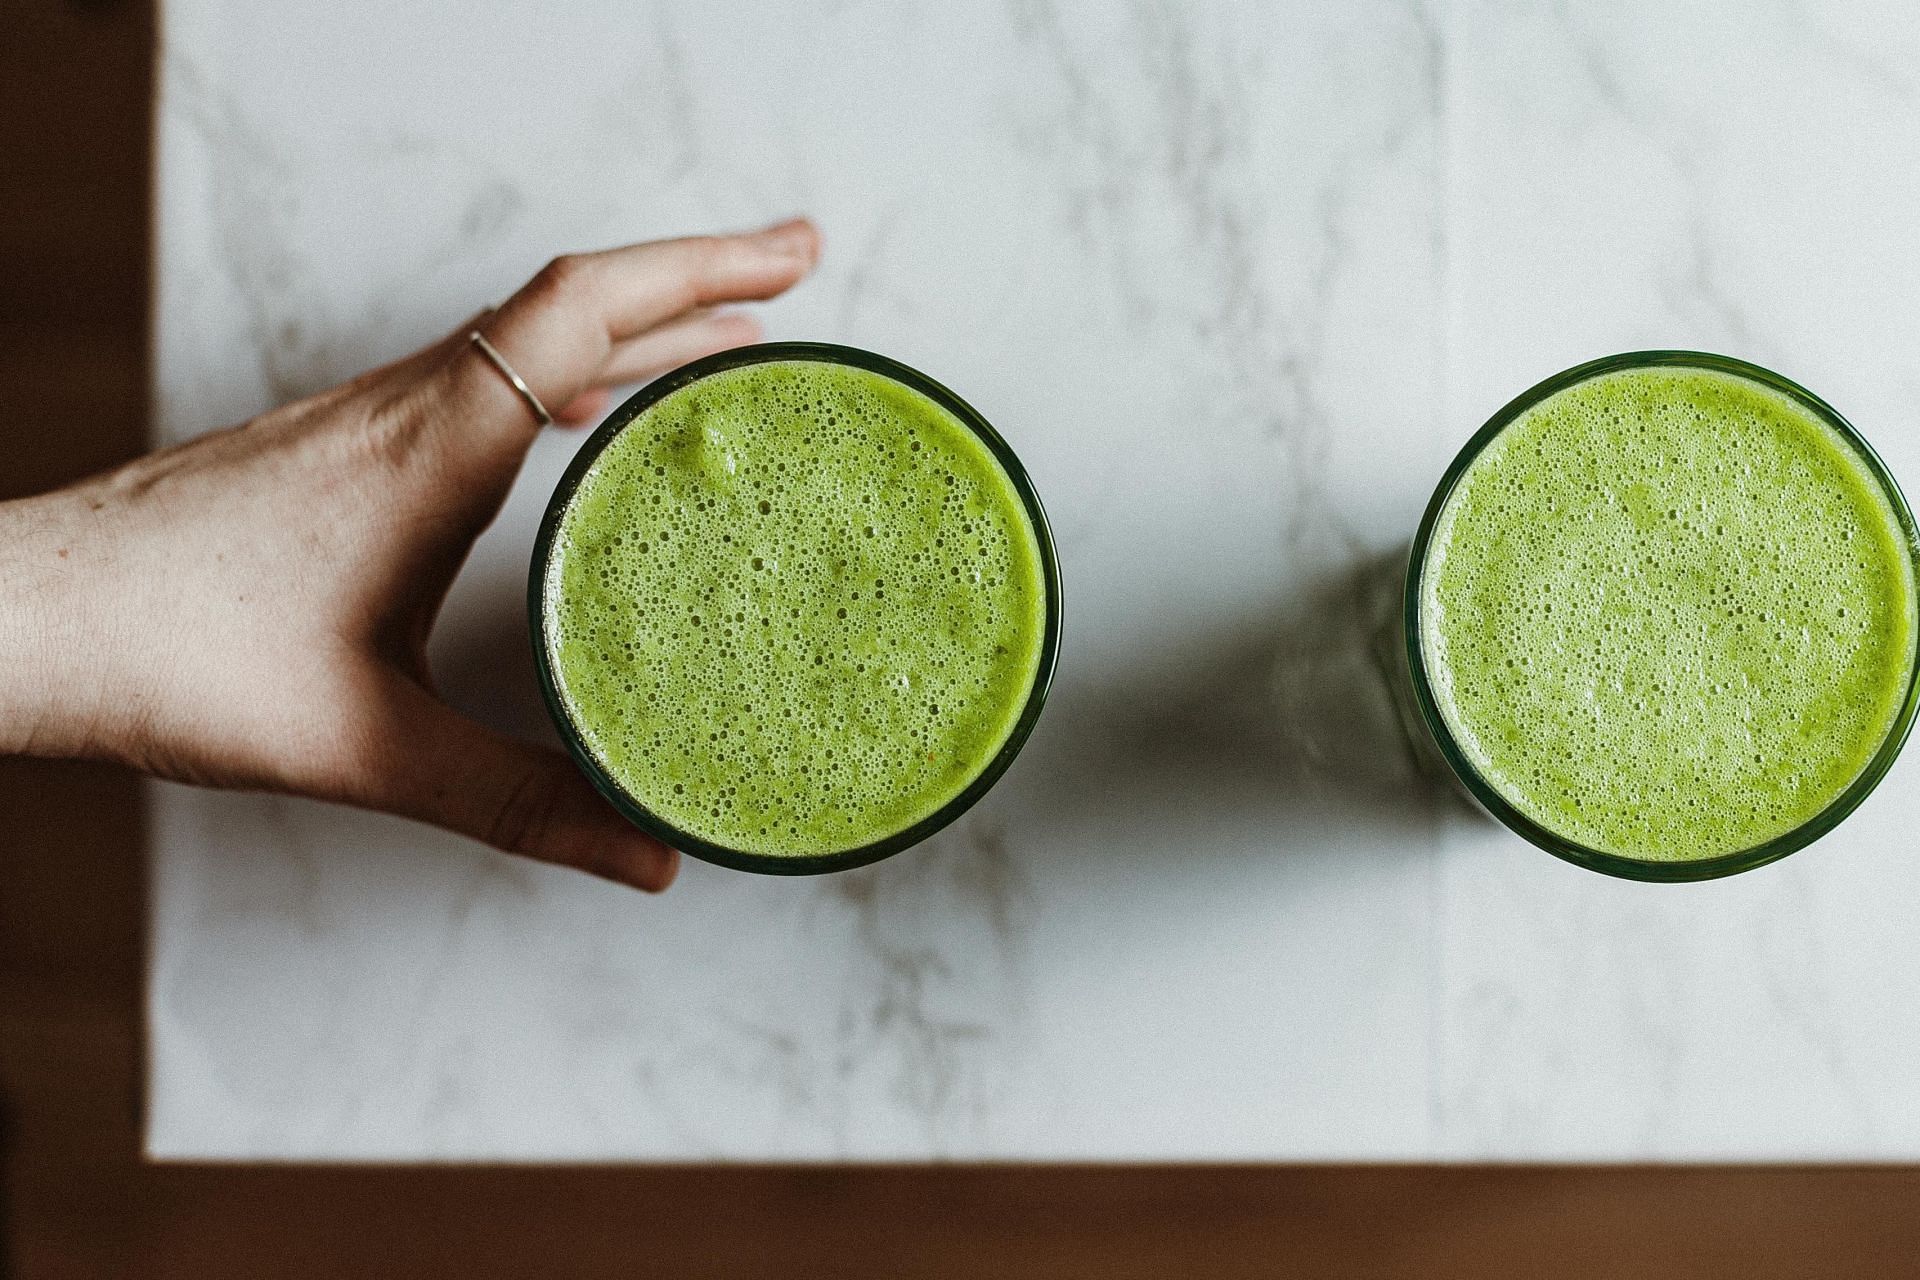 Wheatgrass powder has the ability to improve your gut health (image sourced via Pexels / Photo by Alex Lvrs)